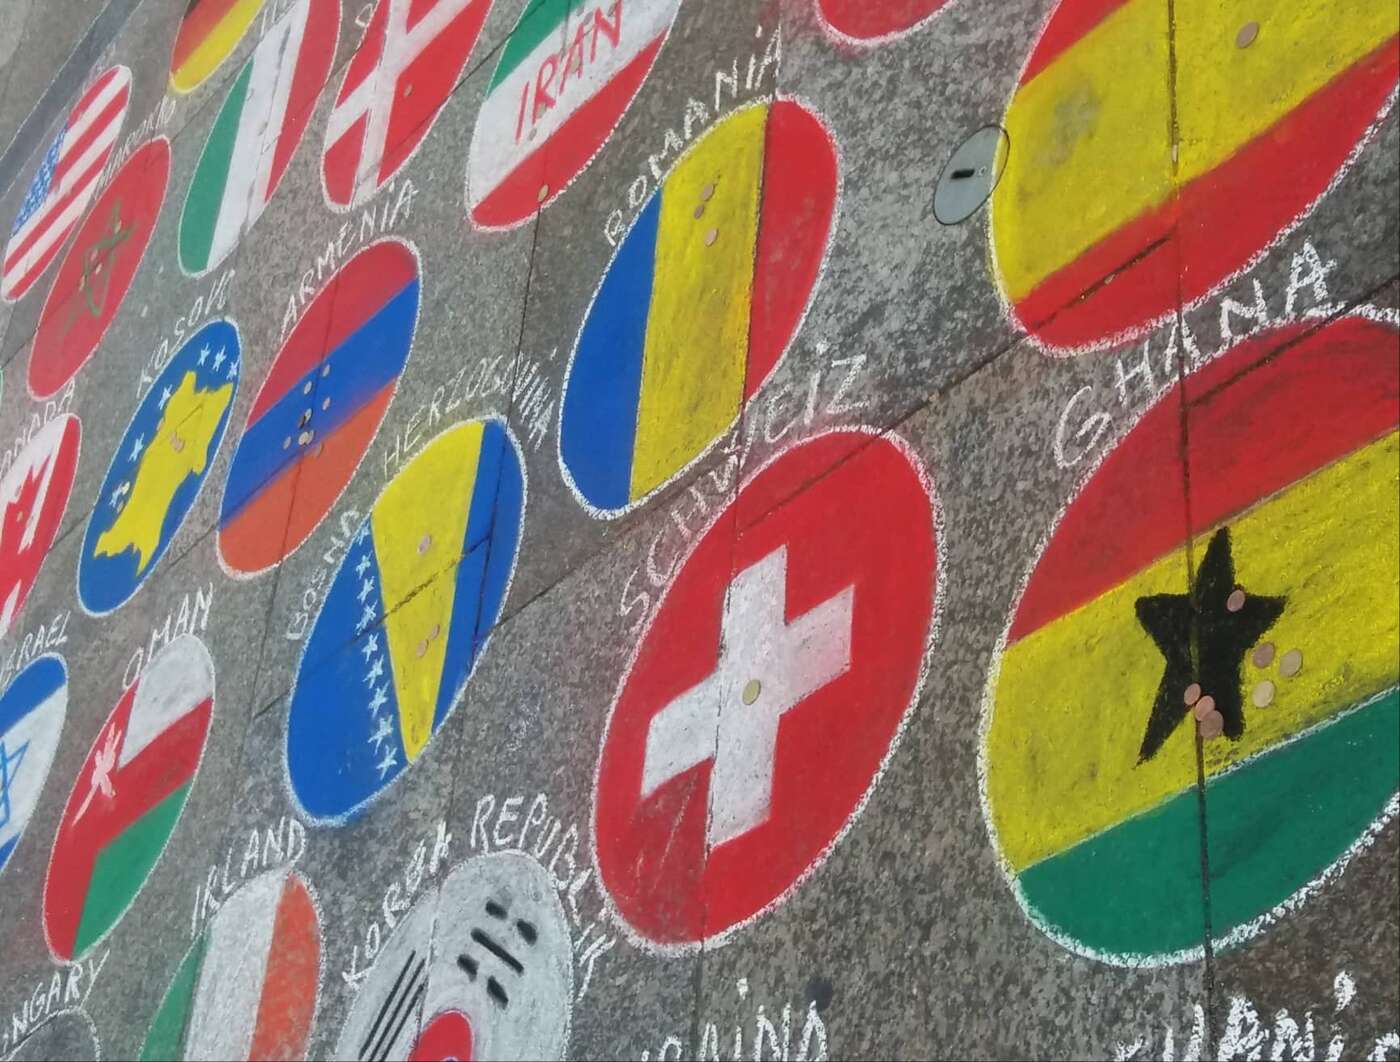 A photograph of flags drawn in chalk on the ground near Cologne cathedral.